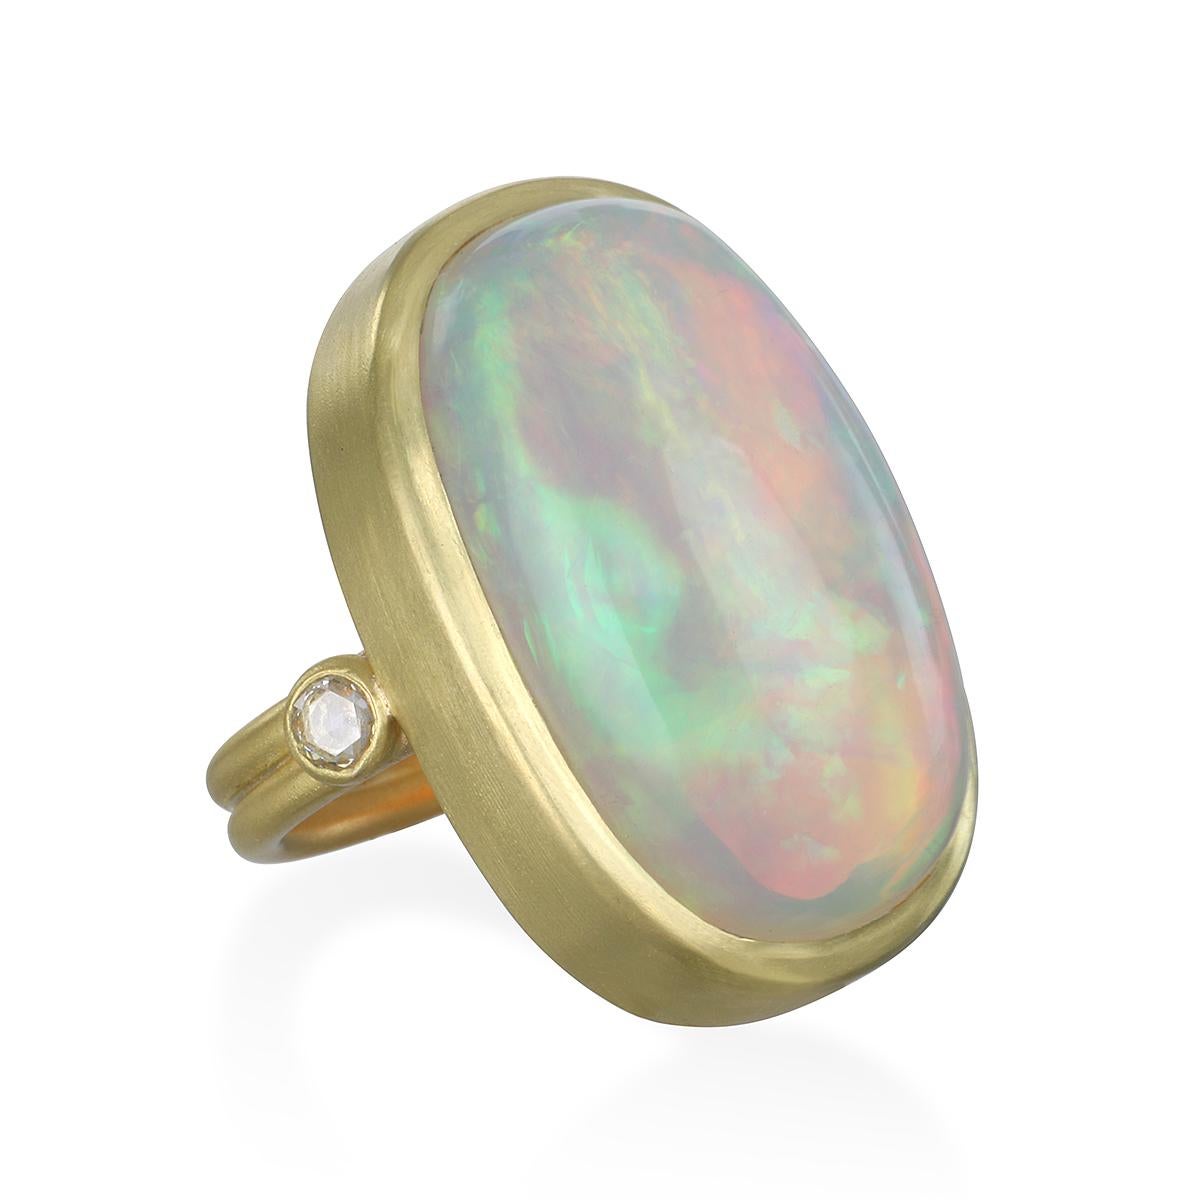 Unique, one-of-a-kind statement ring.
Fabricated in Faye Kim's signature 18k green gold, the unique shape and cut of this Ethiopian Opal is highlighted to stand out and shine brightly with the addition of white rose cut diamonds.
Size 7.25
Ethiopian